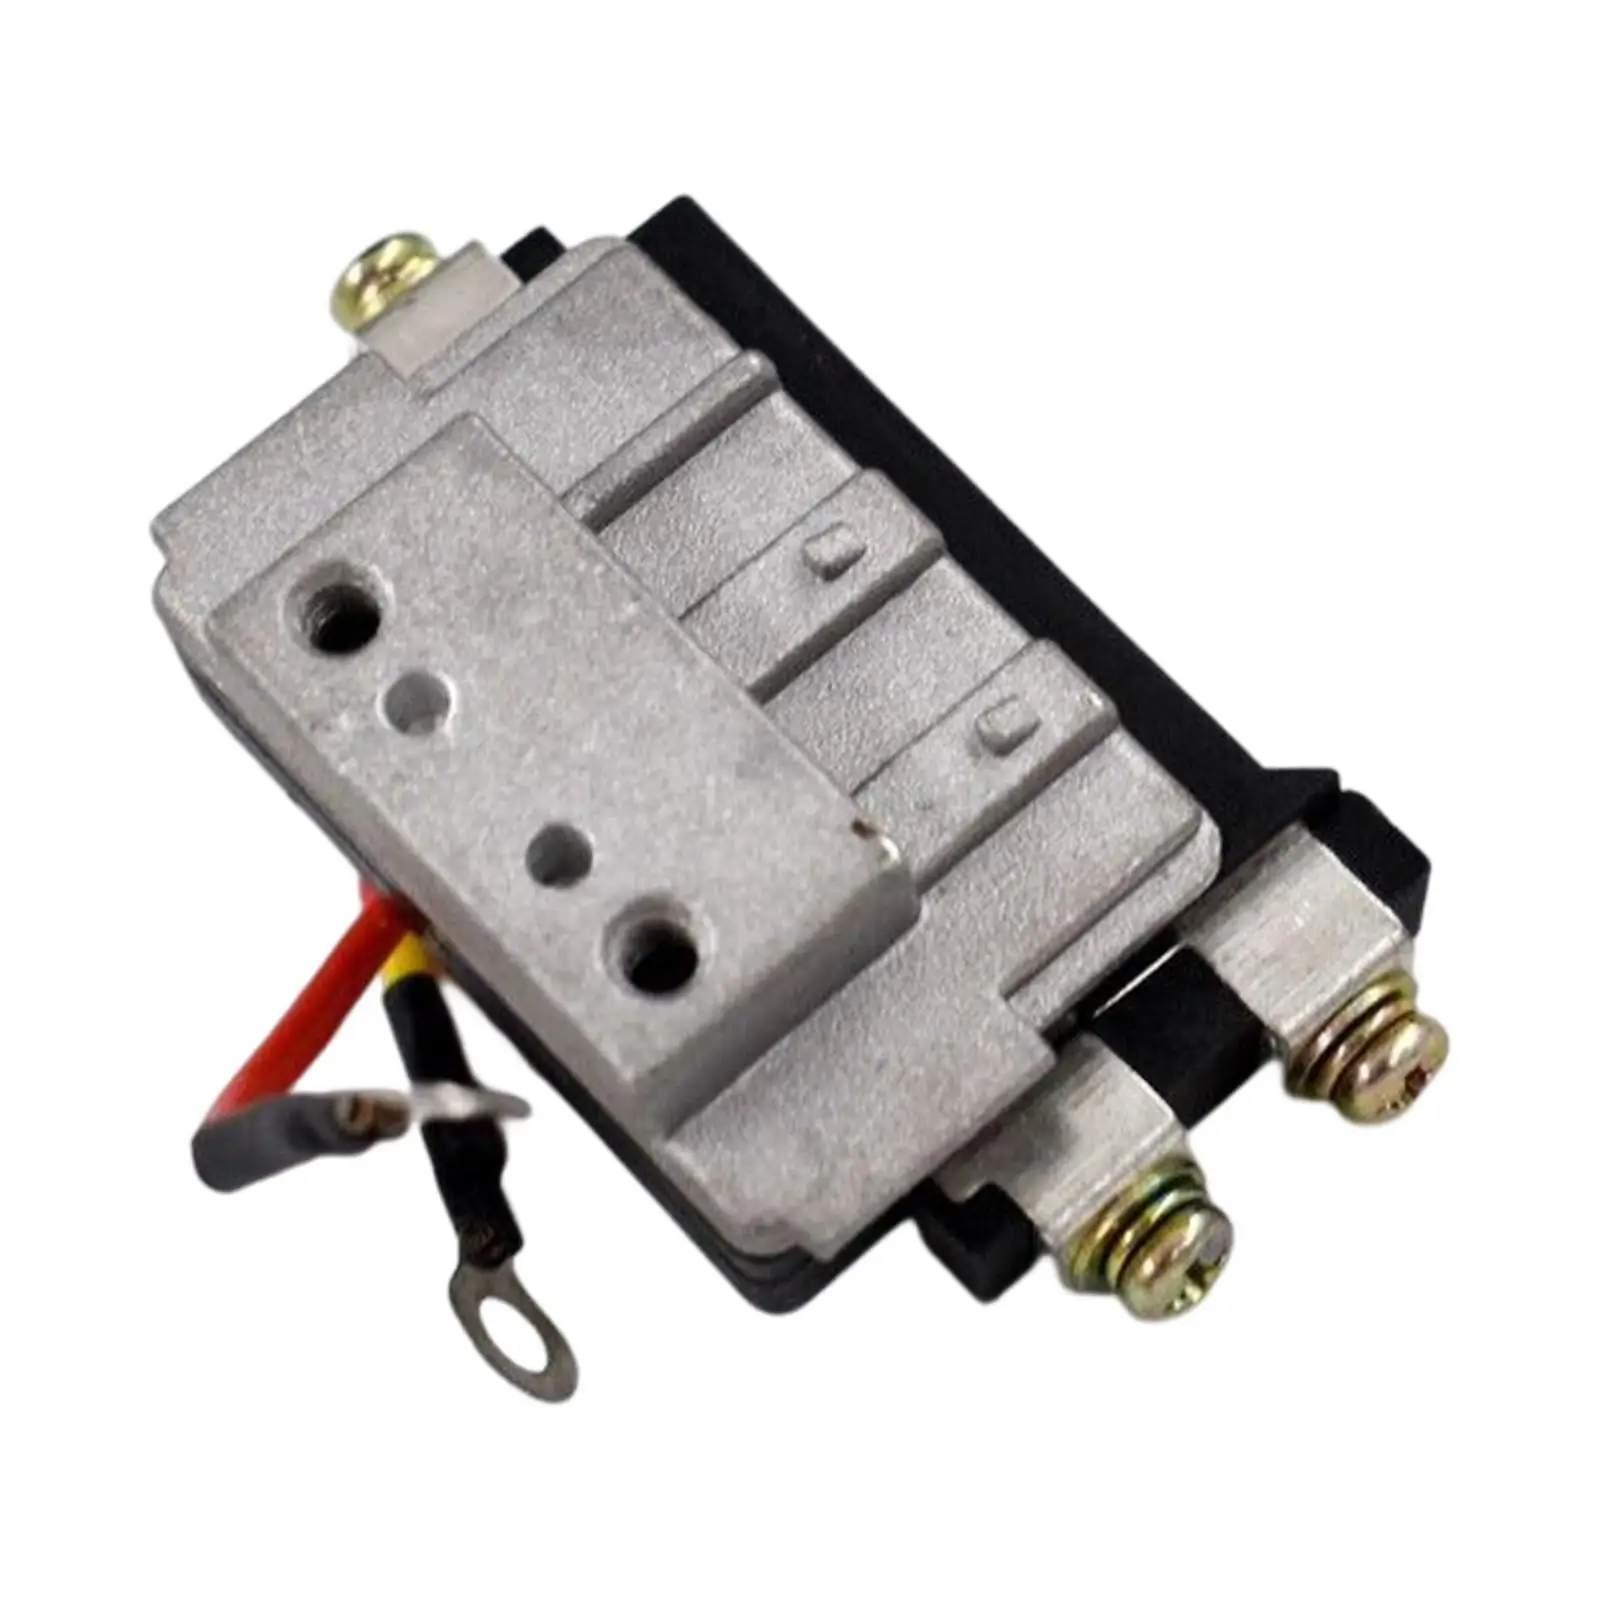 Ignition Control Module Accessories Replaces Durable for Toyota Corolla